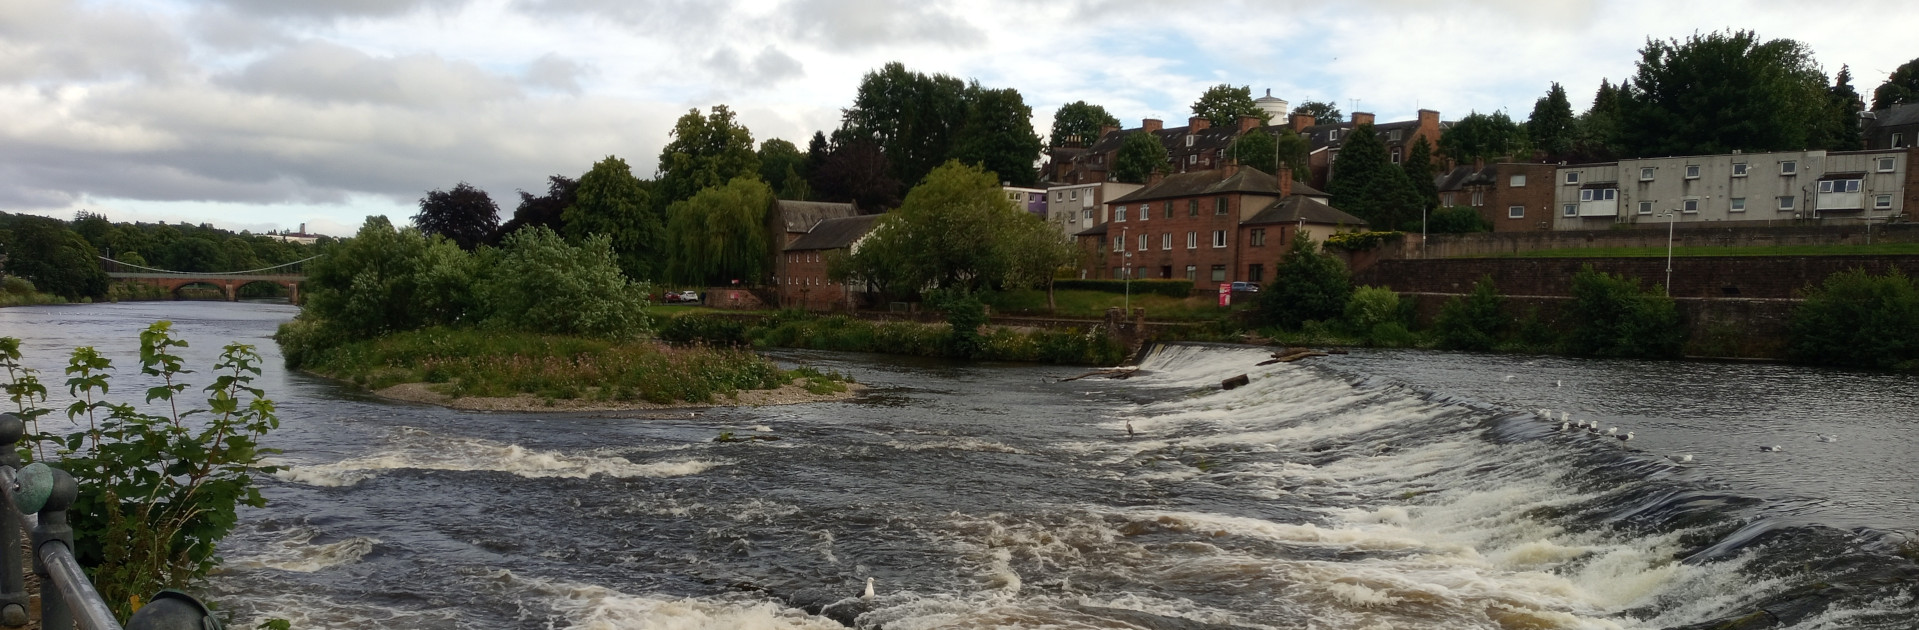 River Nith, Dumfries. 7:10pm, 6th July 2022.